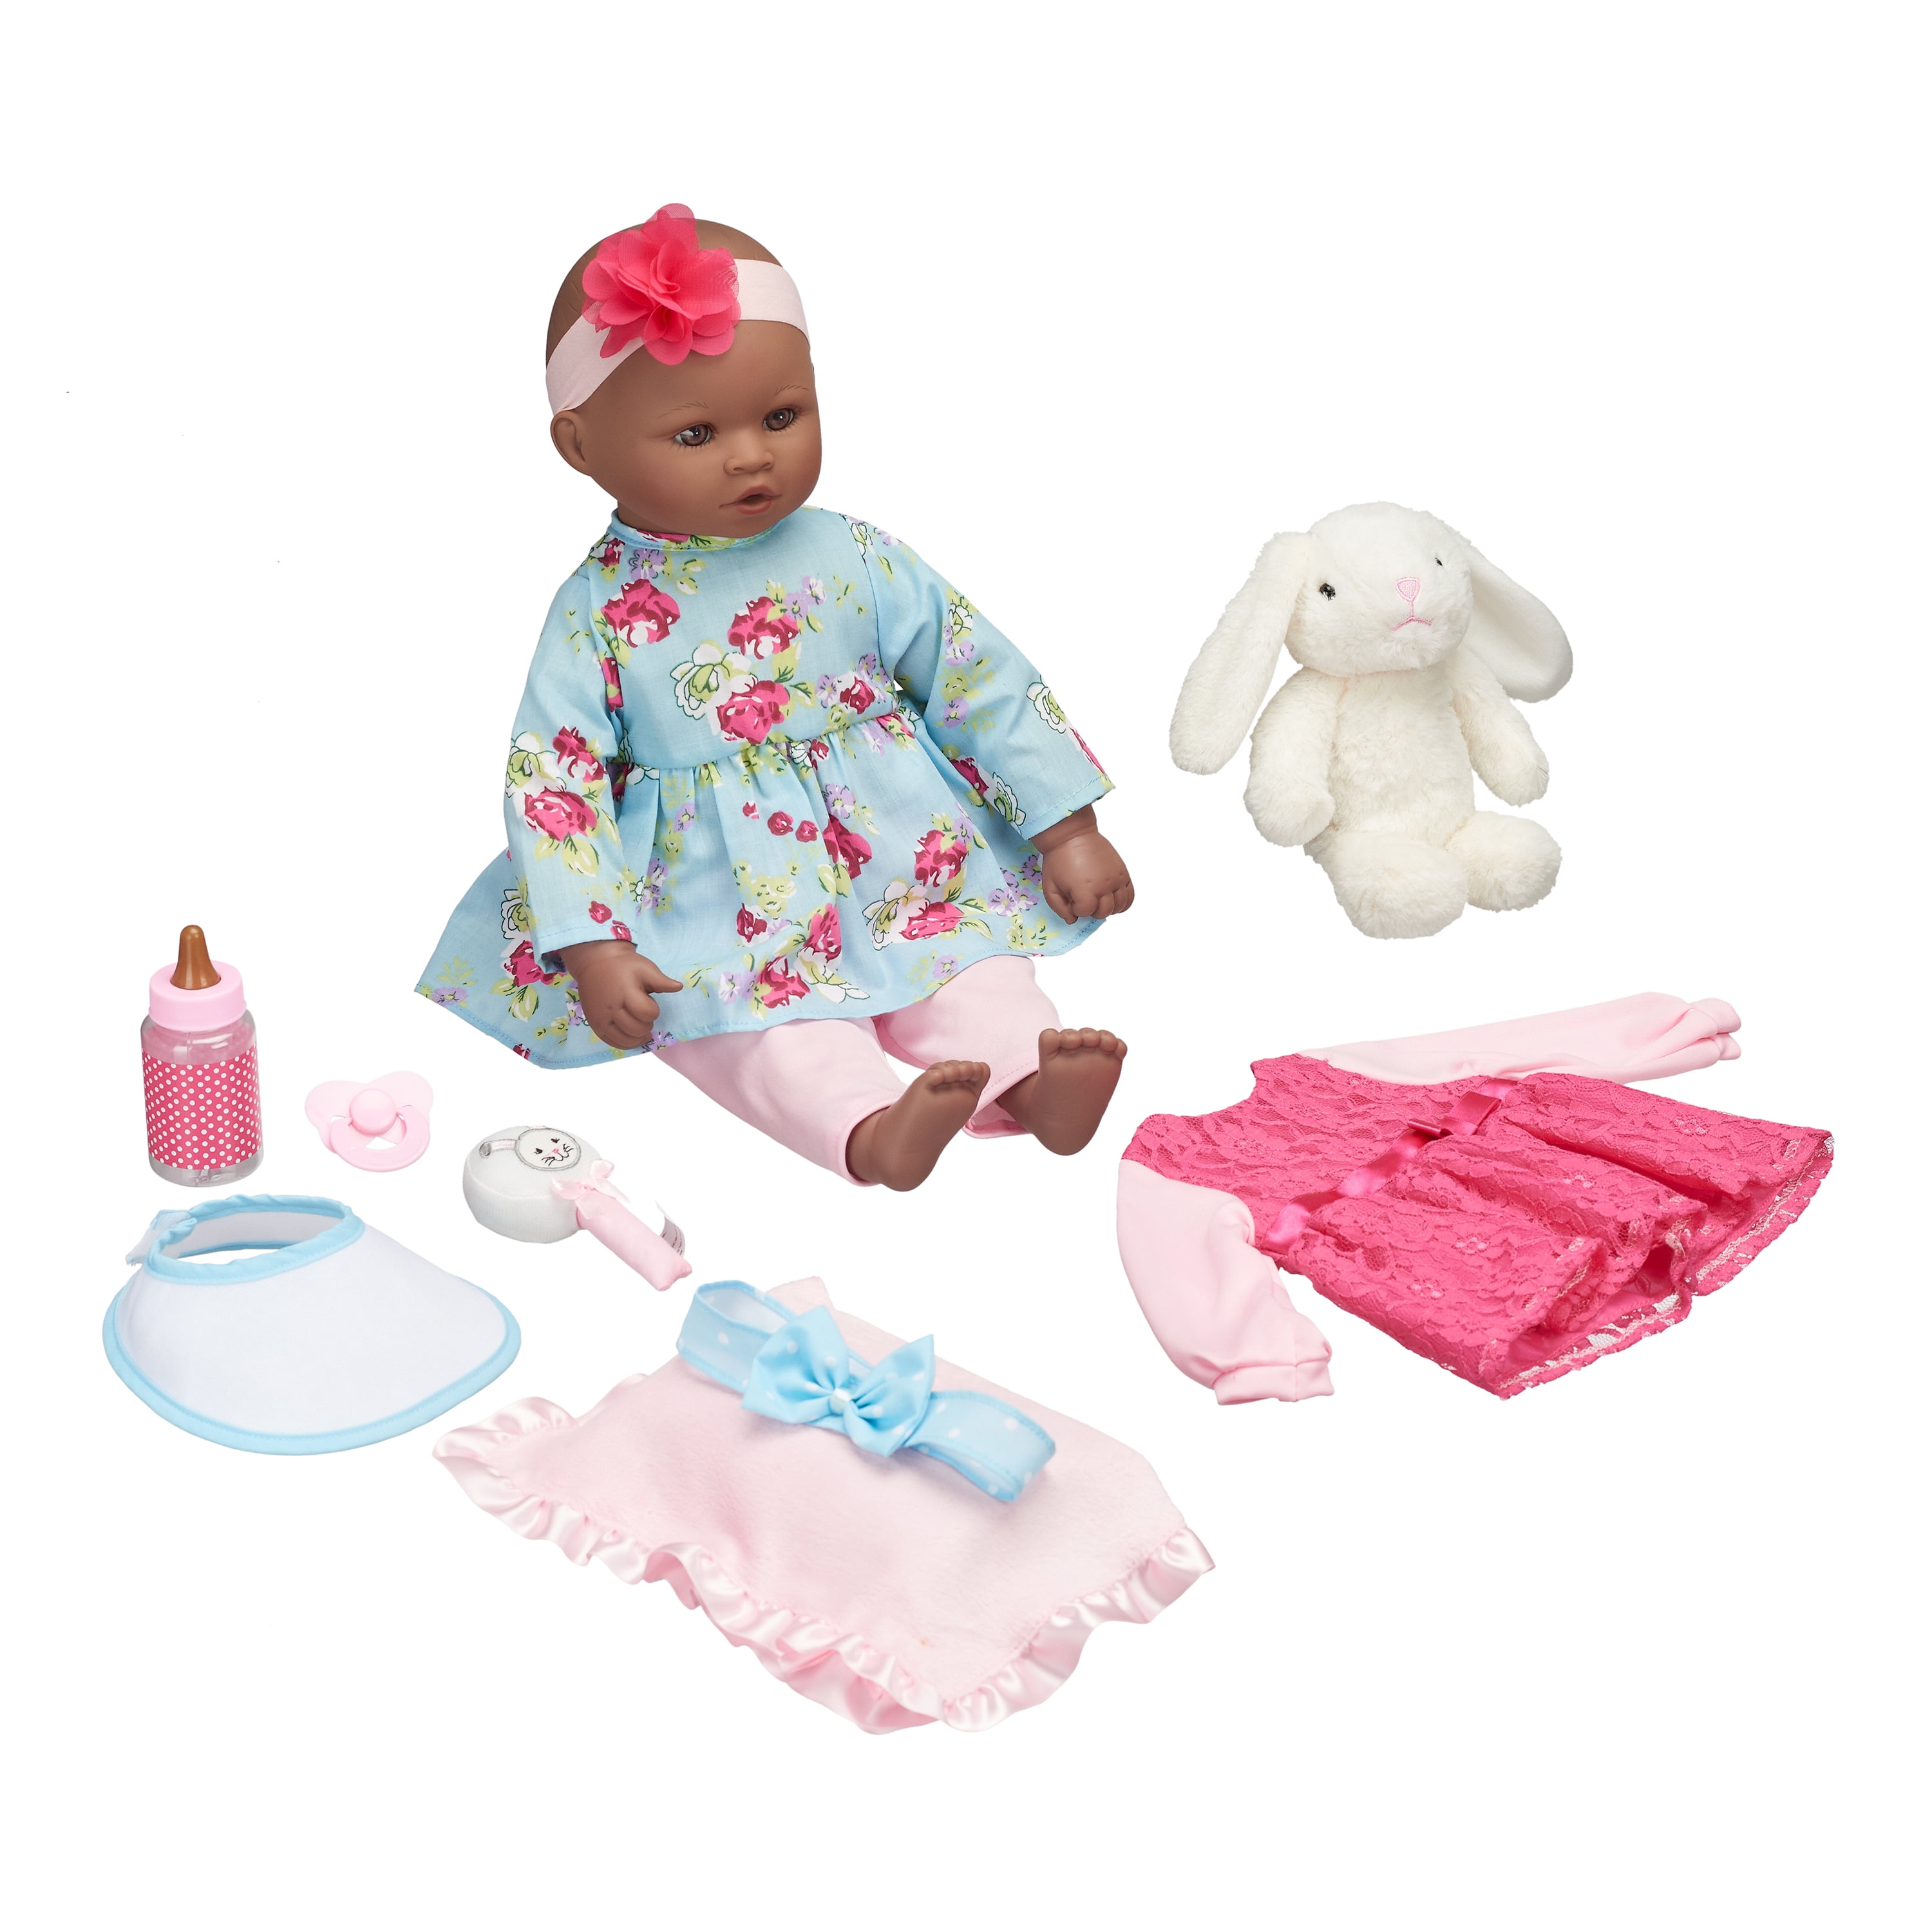 My Sweet Love Crawling Baby Toy Set 2 Pieces 